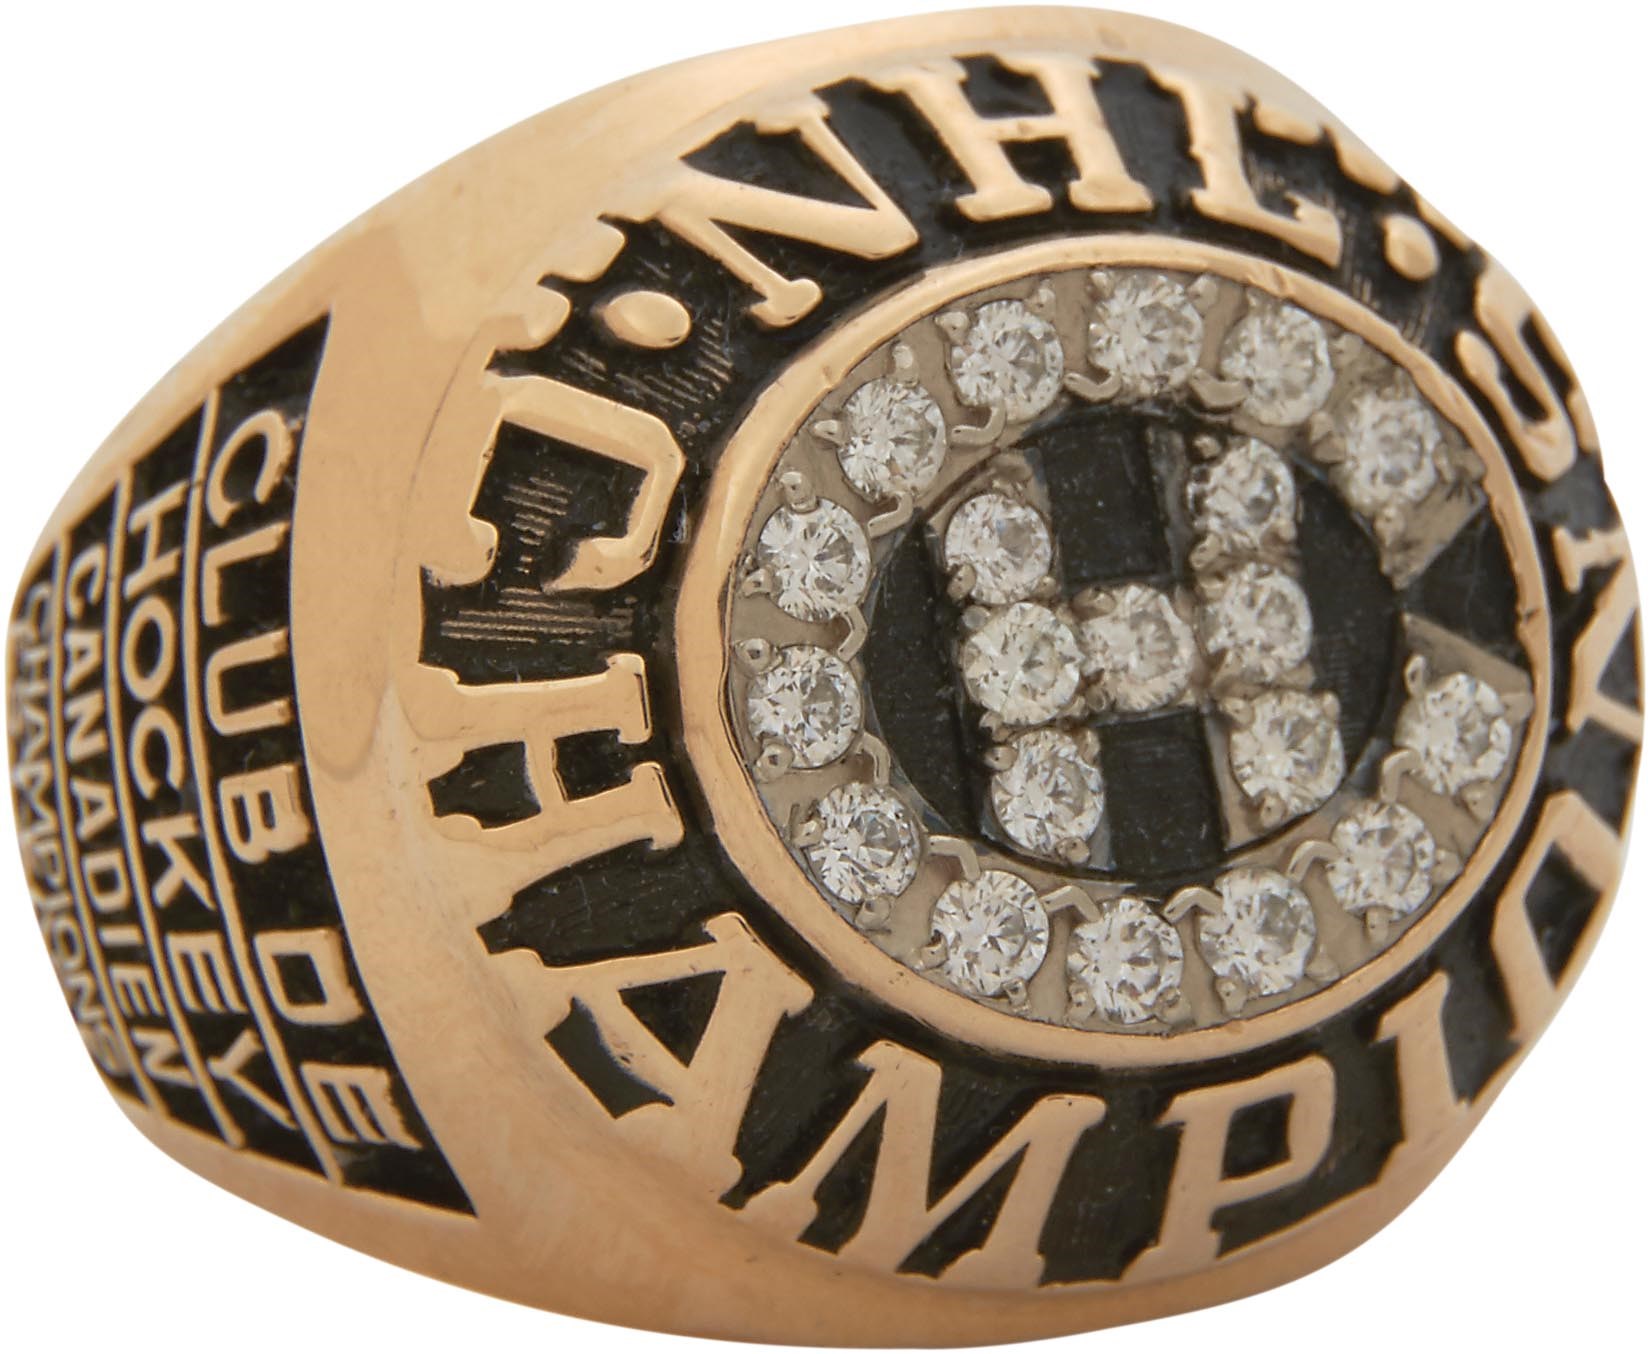 Hockey - Guy Lafleur 1977 Montreal Canadiens Stanley Cup Championship Ring w/20 Real Diamonds